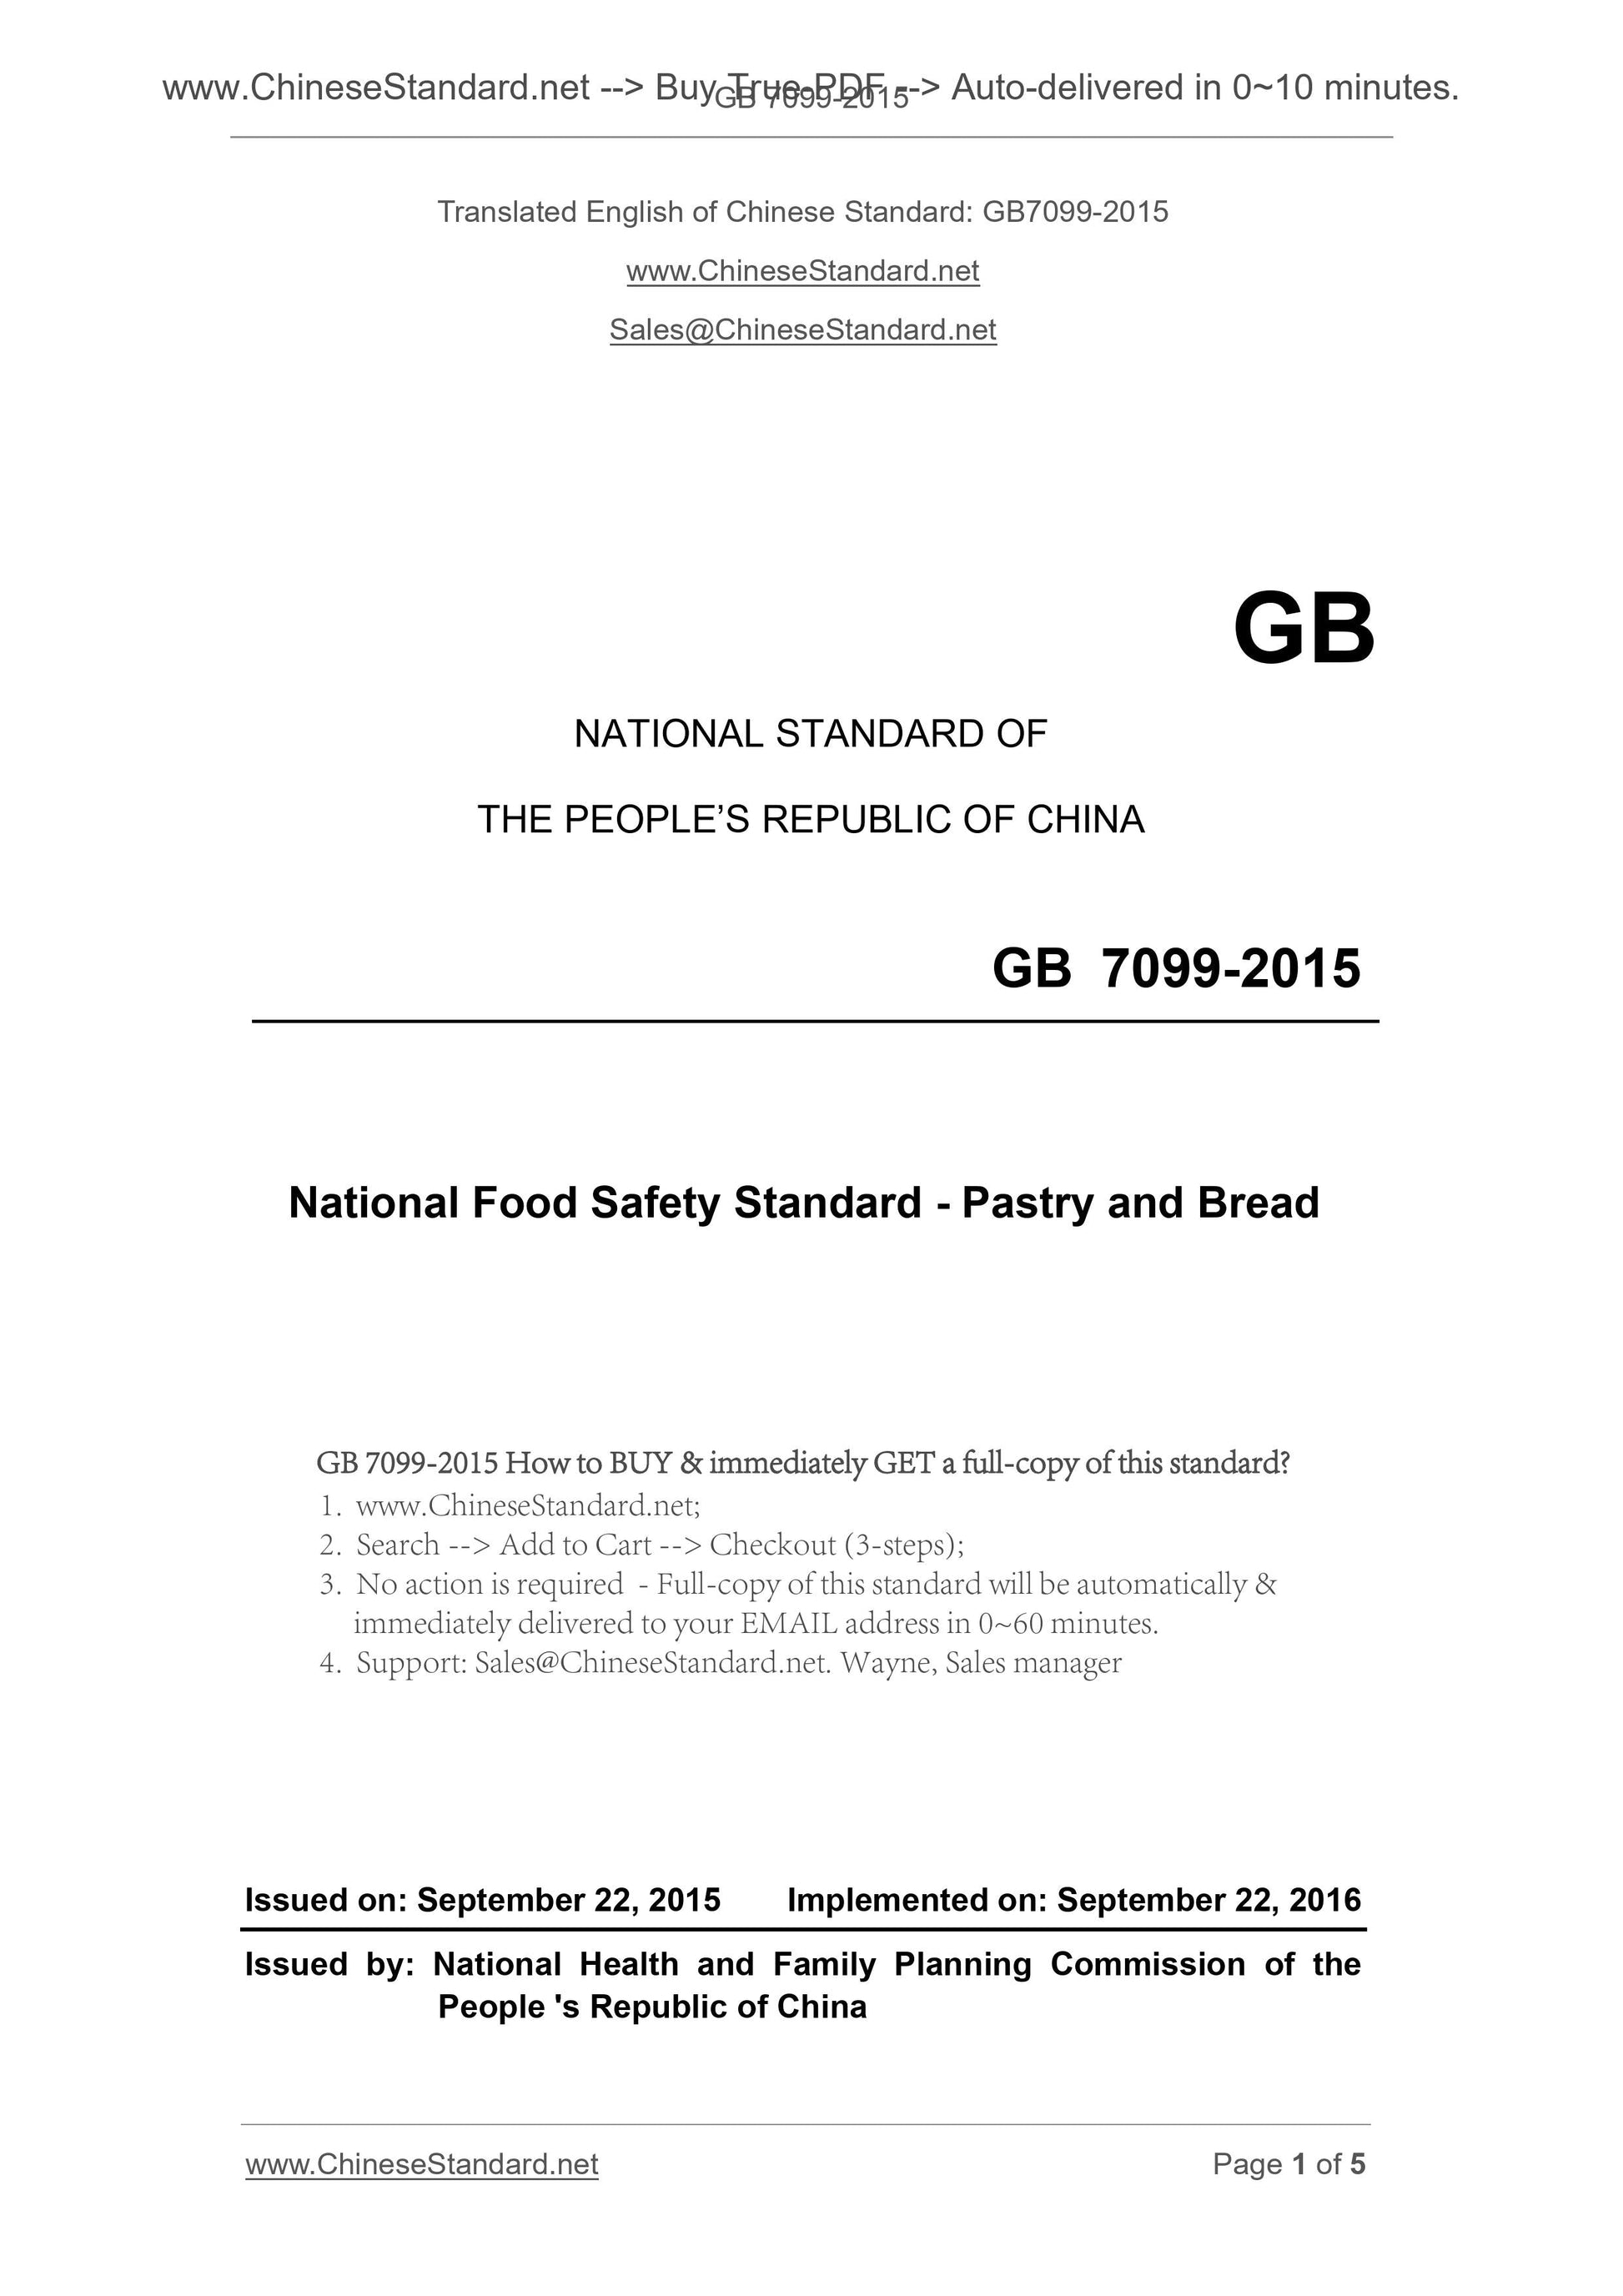 GB 7099-2015 Page 1